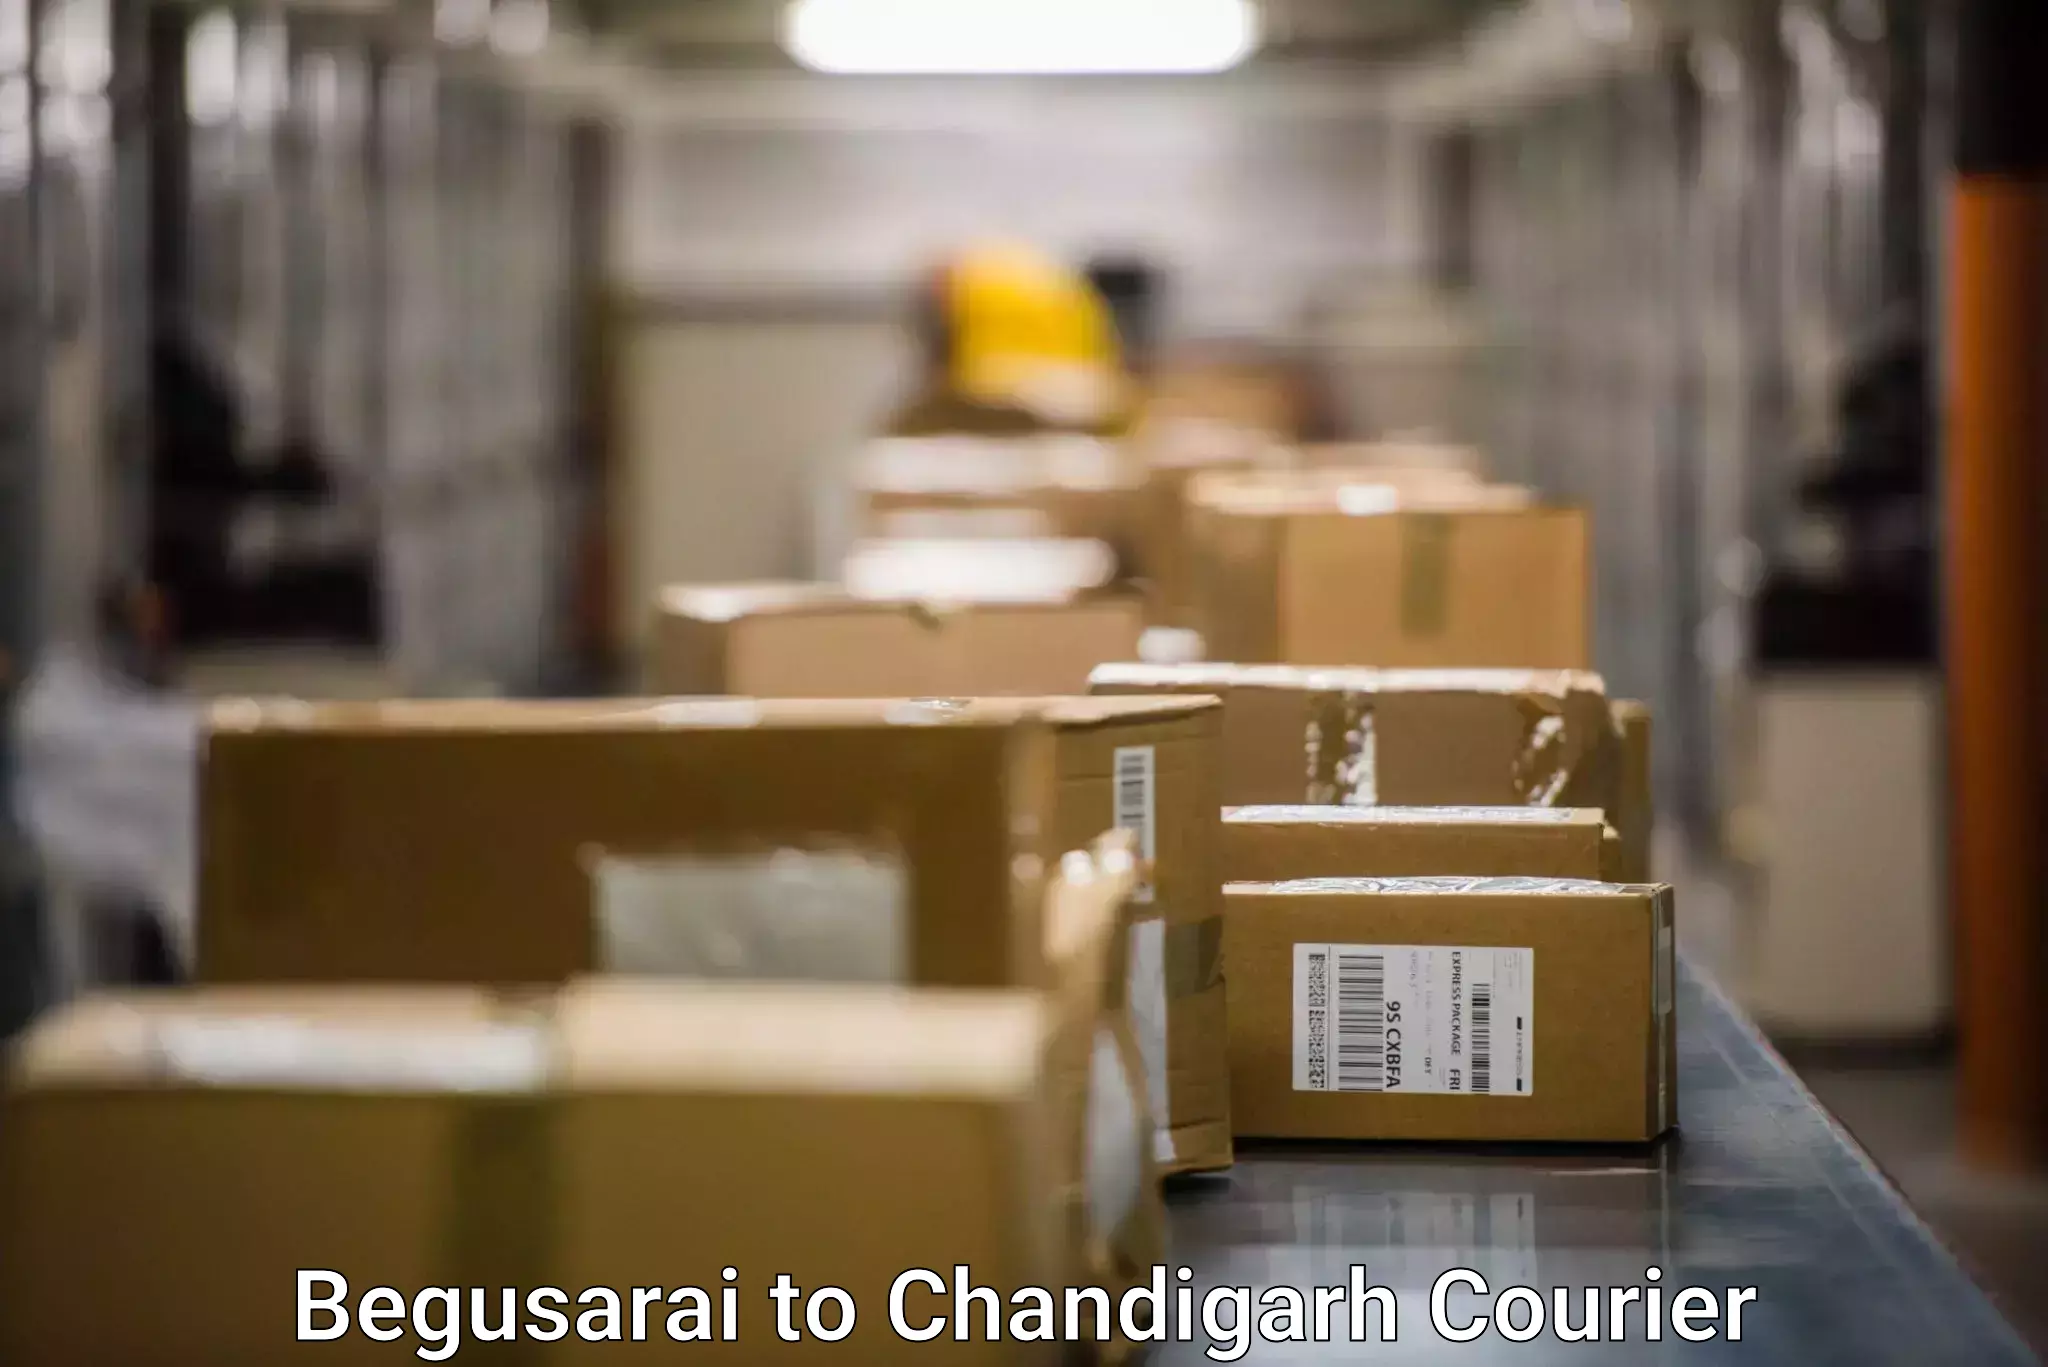 Courier service efficiency Begusarai to Chandigarh